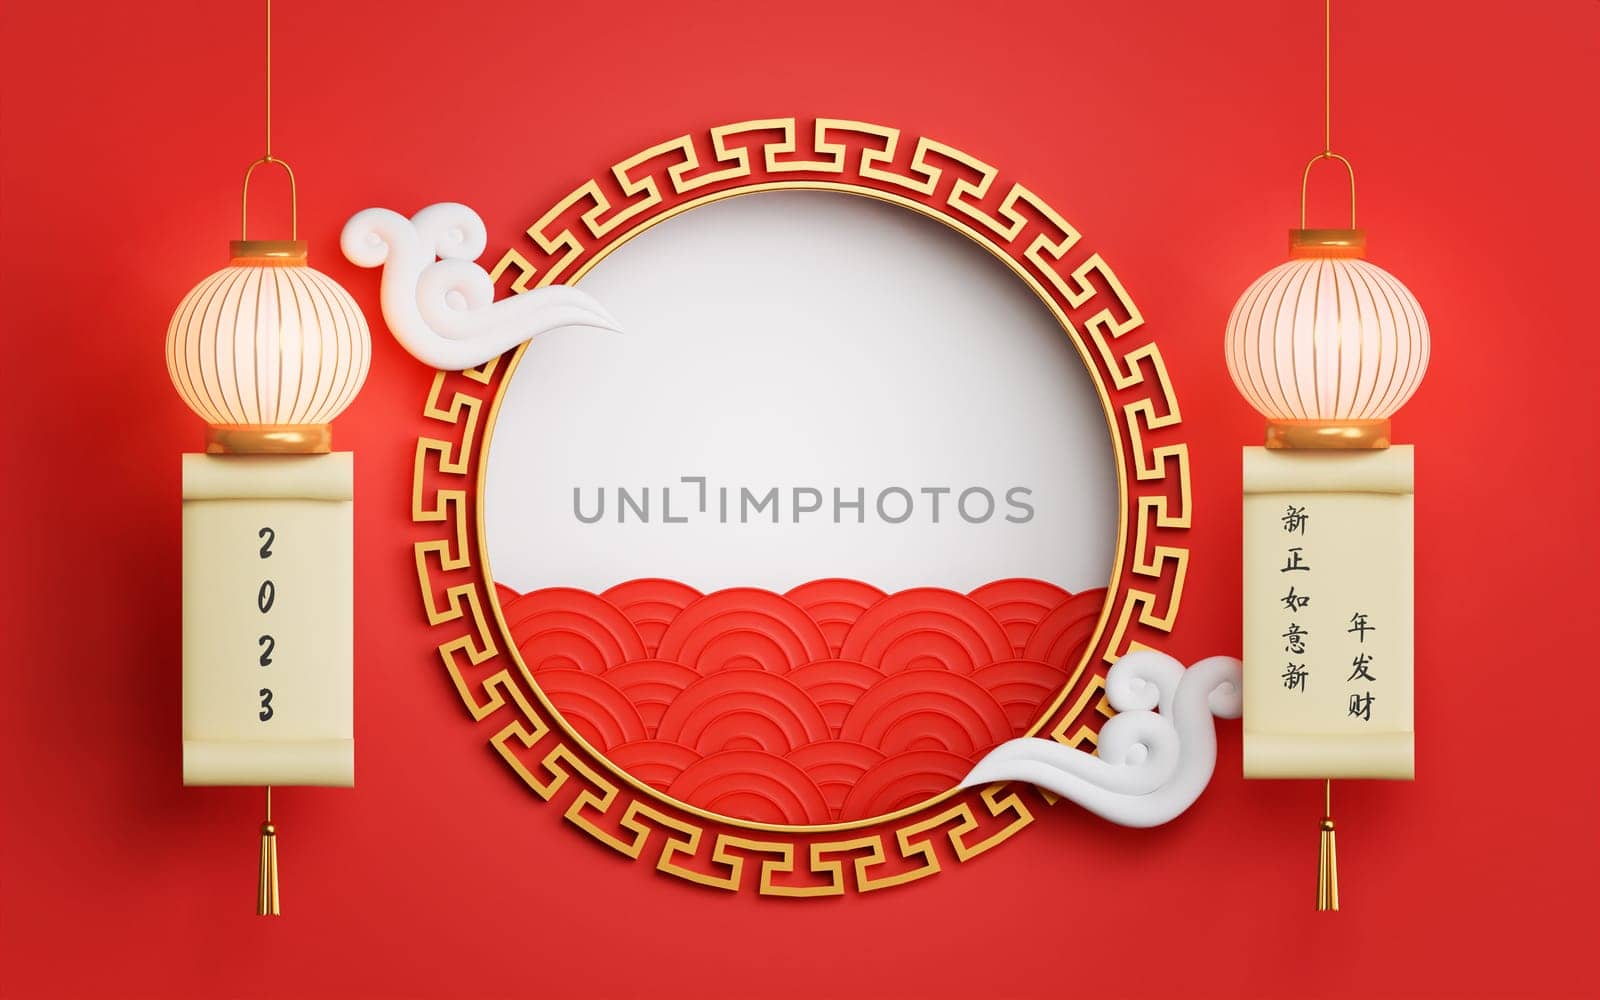 3d render image of red background celebrate Chinese New Year 2023 the rabbit year. 3d render illustration.